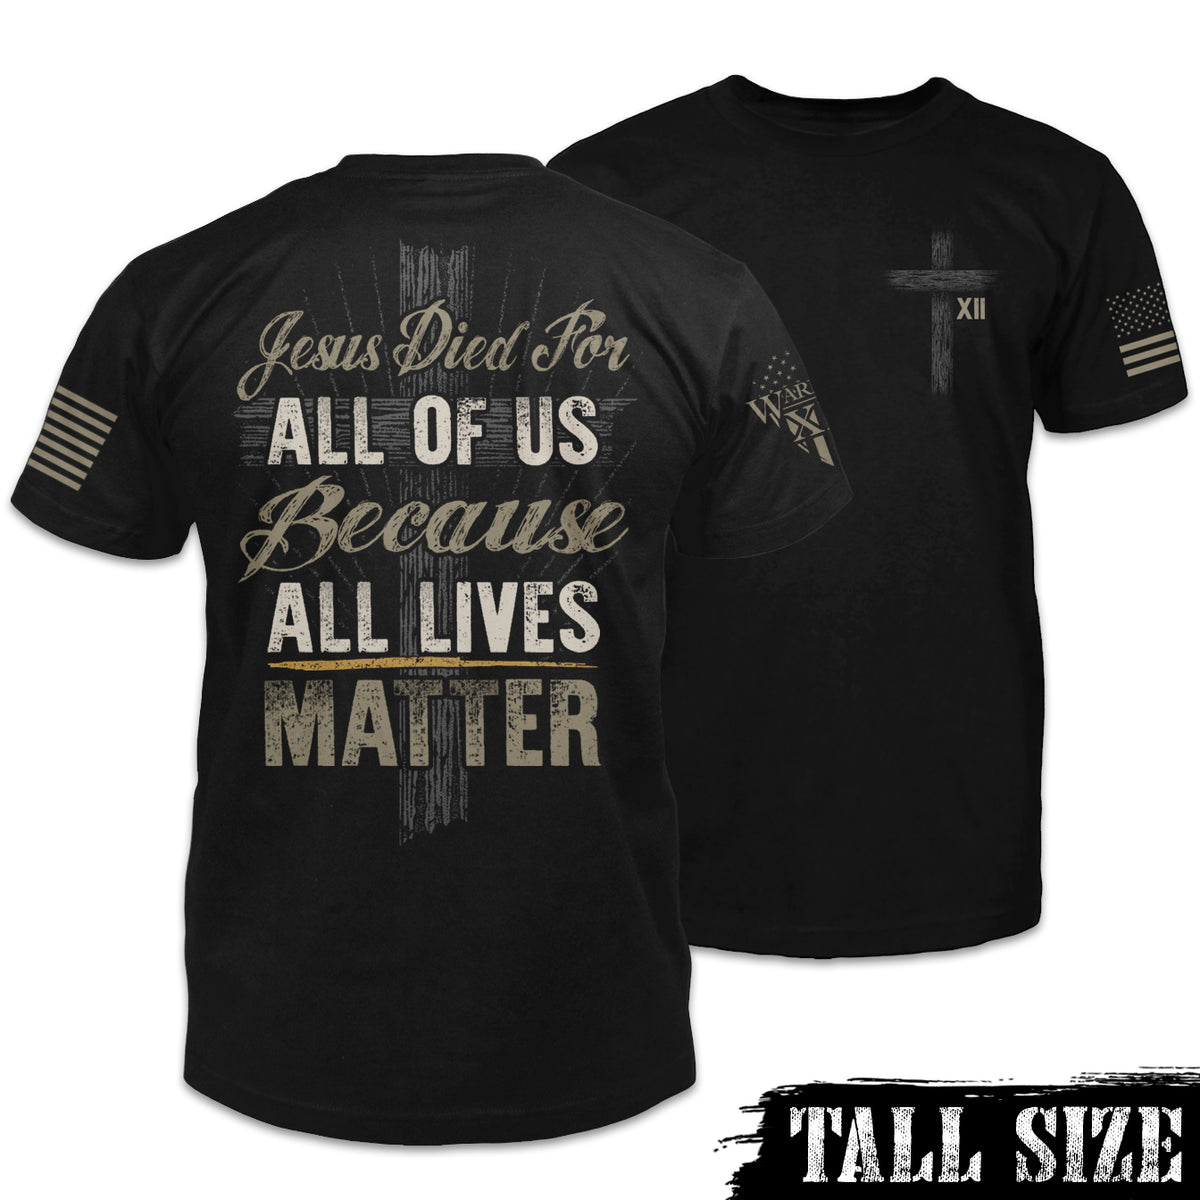 Front & back black tall sized shirt with the "Jesus died for all of us because ALL LIVES matter" printed on the shirt.